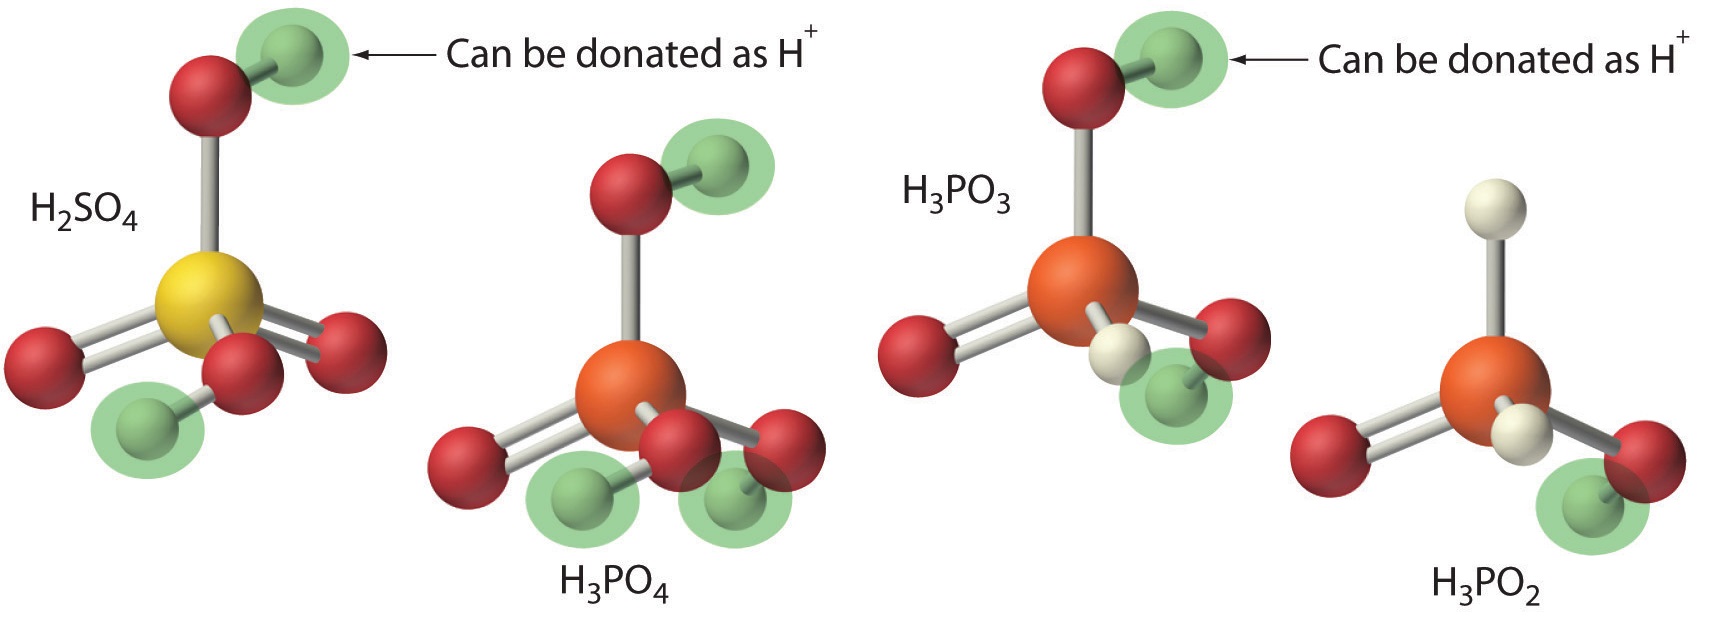 Ball and stick diagram of sulfuric acid, phosporic acid, phosphorous acid, and hypophosphorous acid with all of the hydrogen atoms highlighted to show availability to be donated as H positive ion.